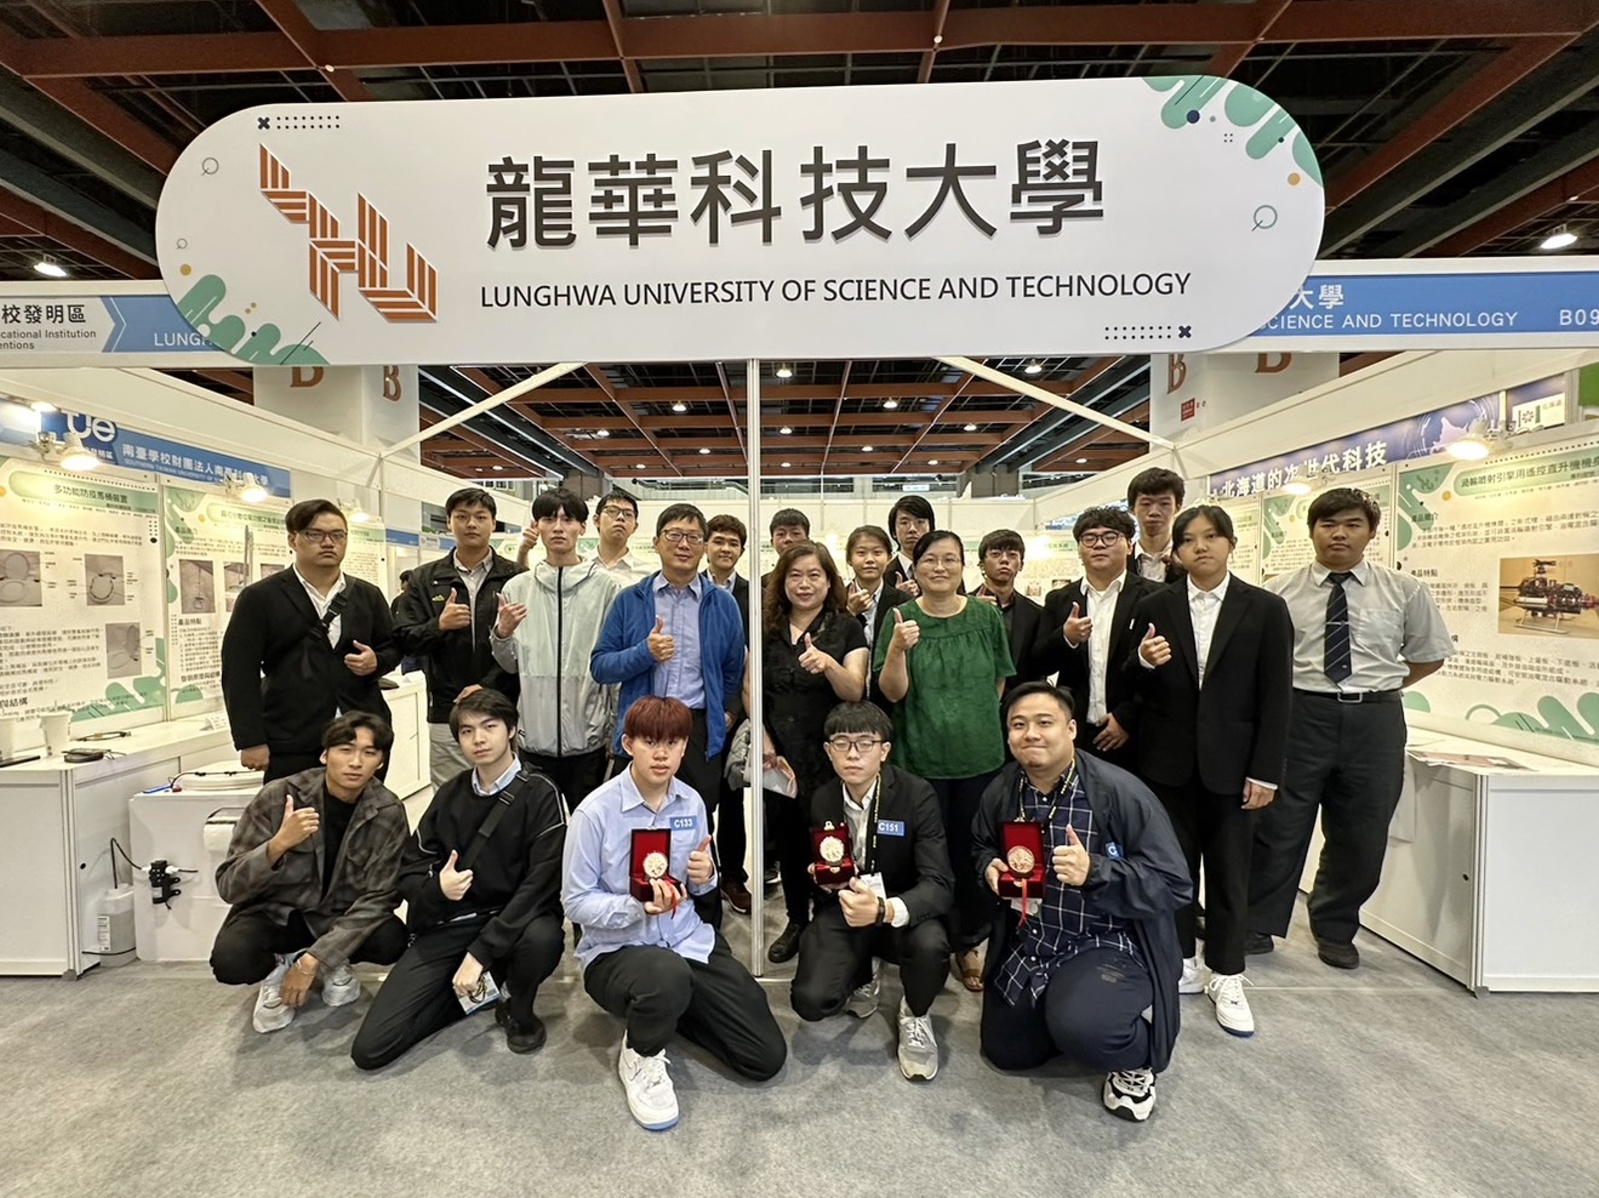 Lunghwa's faculty and students actively participated in the 2023 Taiwan Innotech Expo, securing impressive results with one gold, one silver, and four bronze medals. This accomplishment effectively showcased their outstanding research and development capabilities.